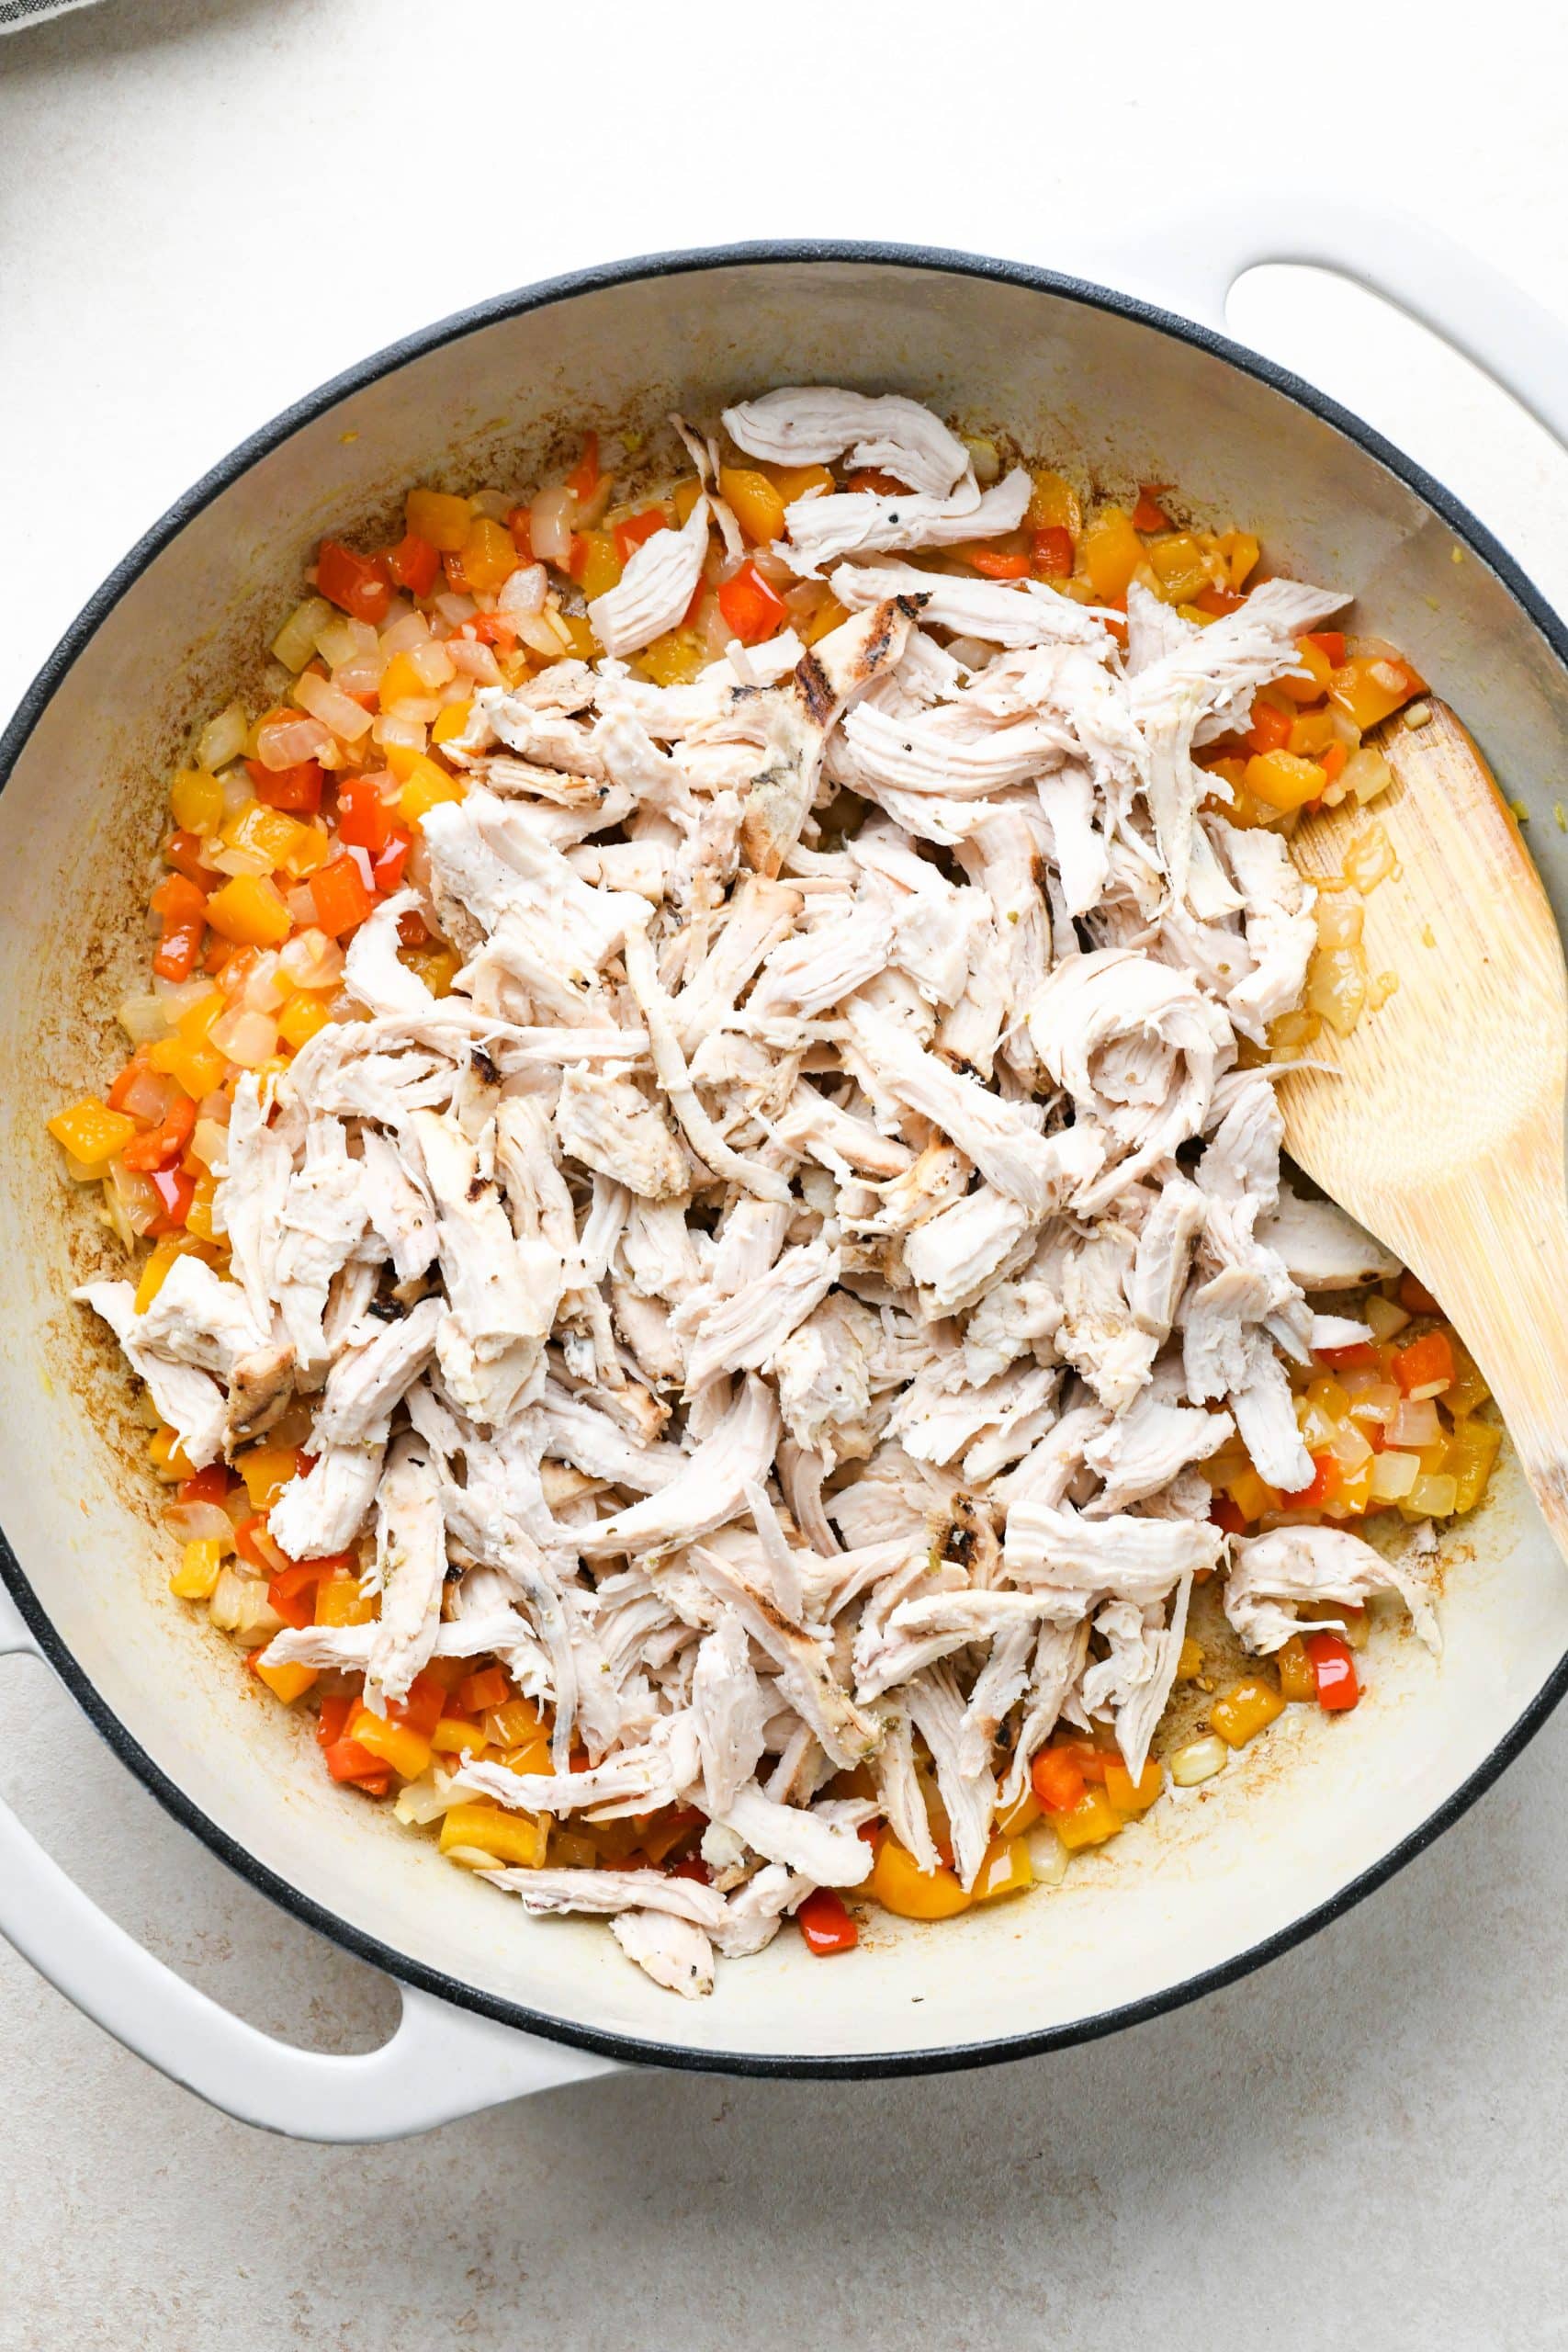 How to make buffalo chicken pasta: Shredded chicken added to the skillet with cooked veggies. 